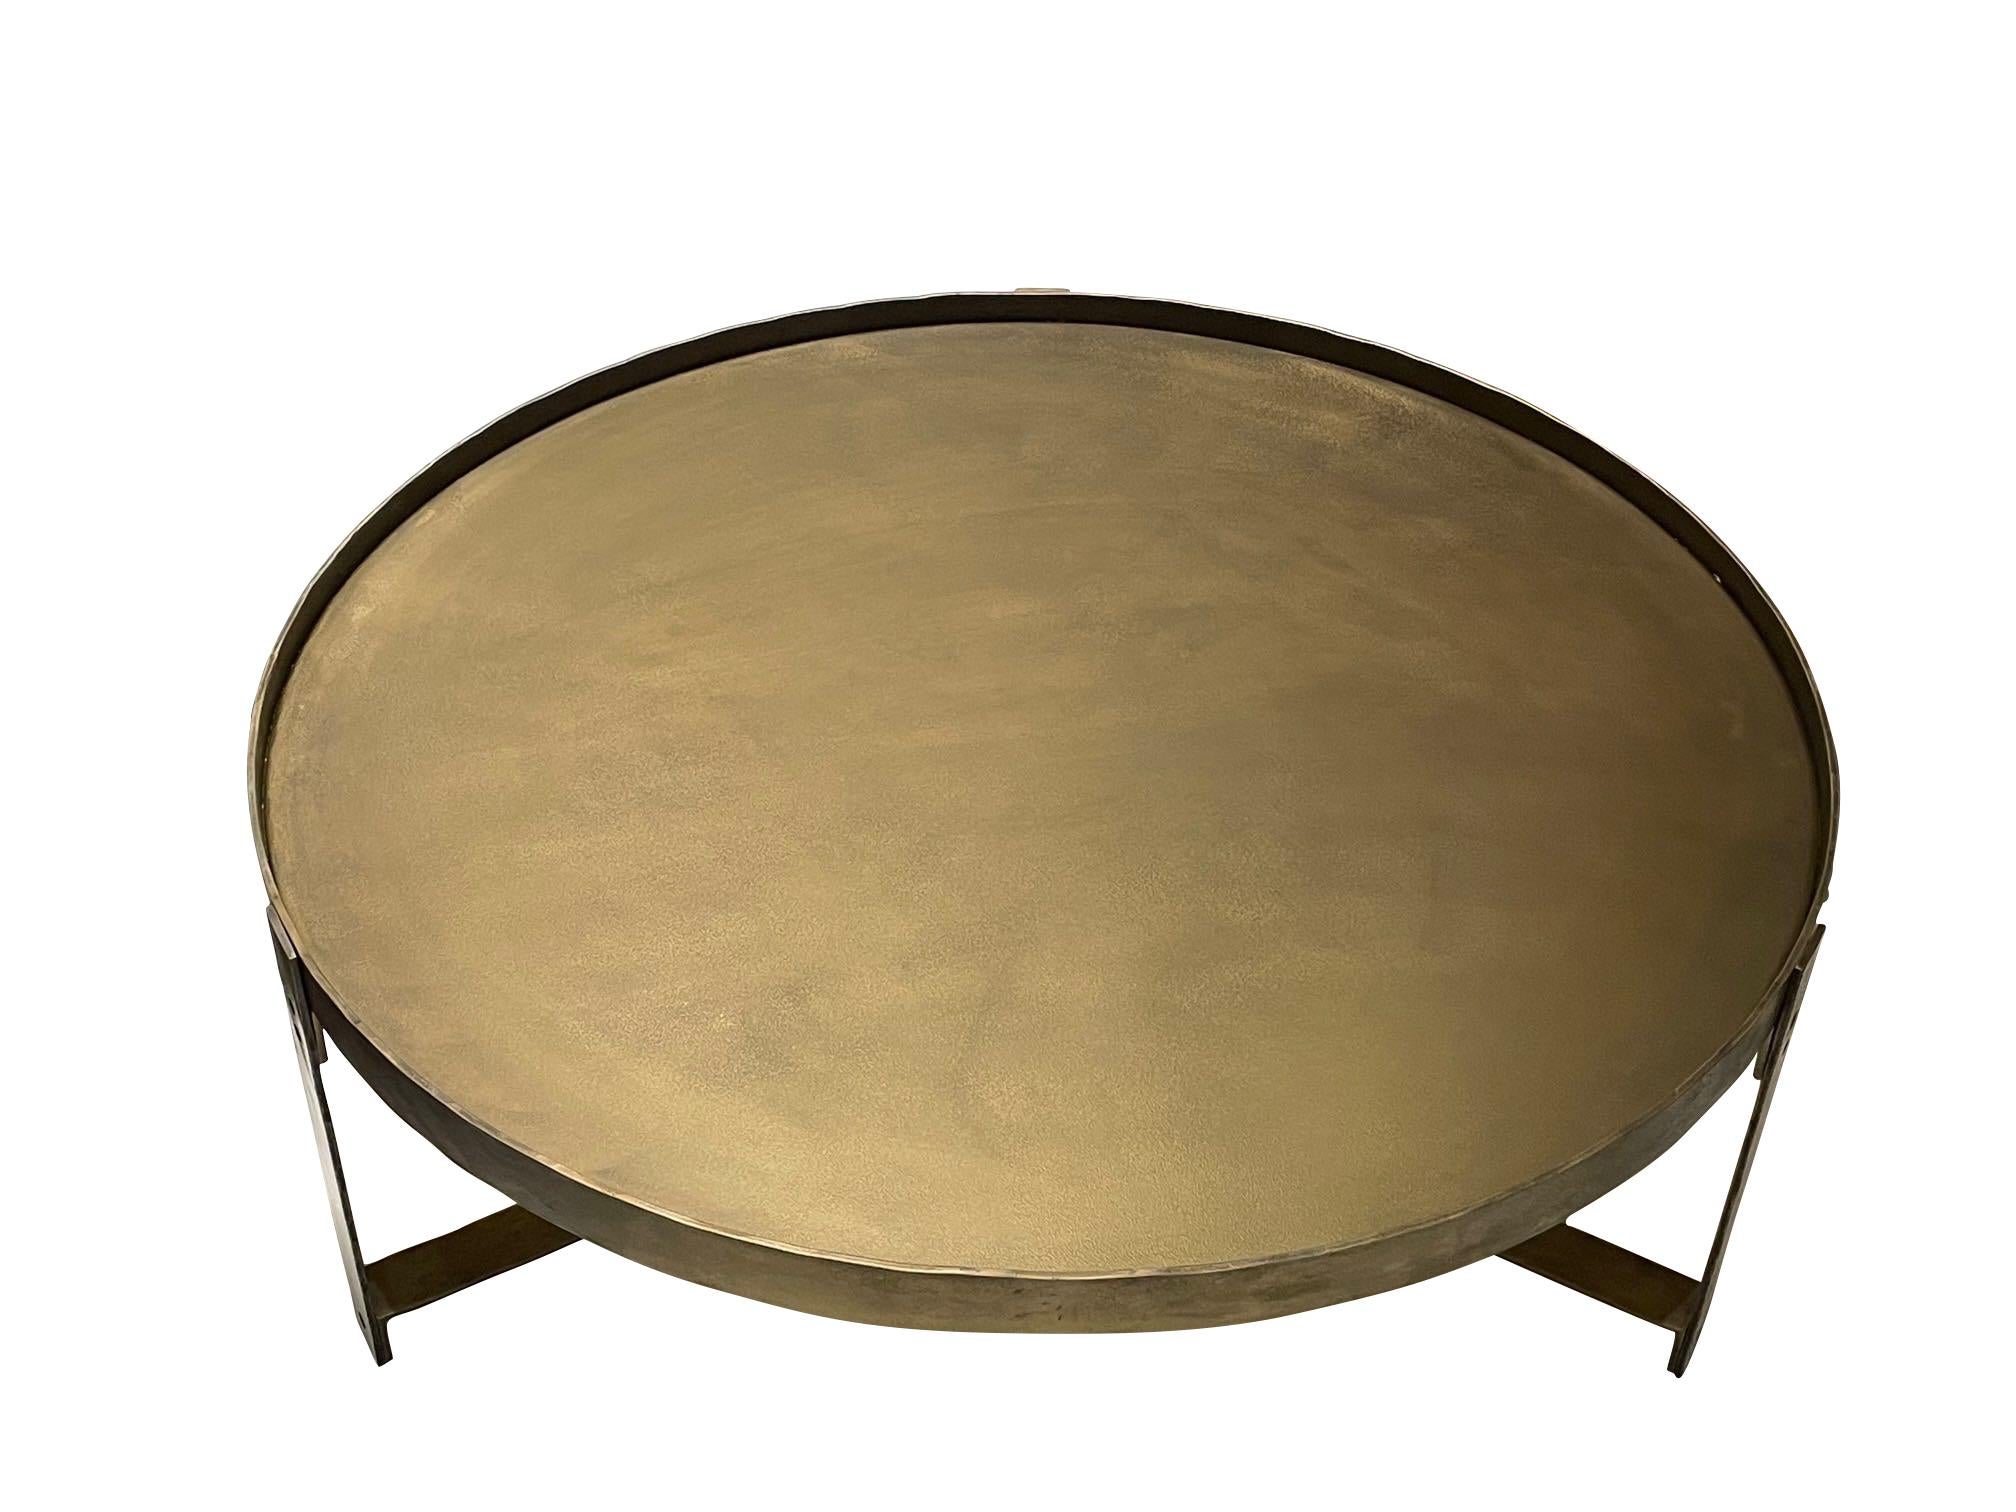 Contemporary Indian round brass coffee table with raised surrounding lip. 
Top supported by self tripod leg X stretcher base.
Also available in smaller size (F2911)
Arriving April.